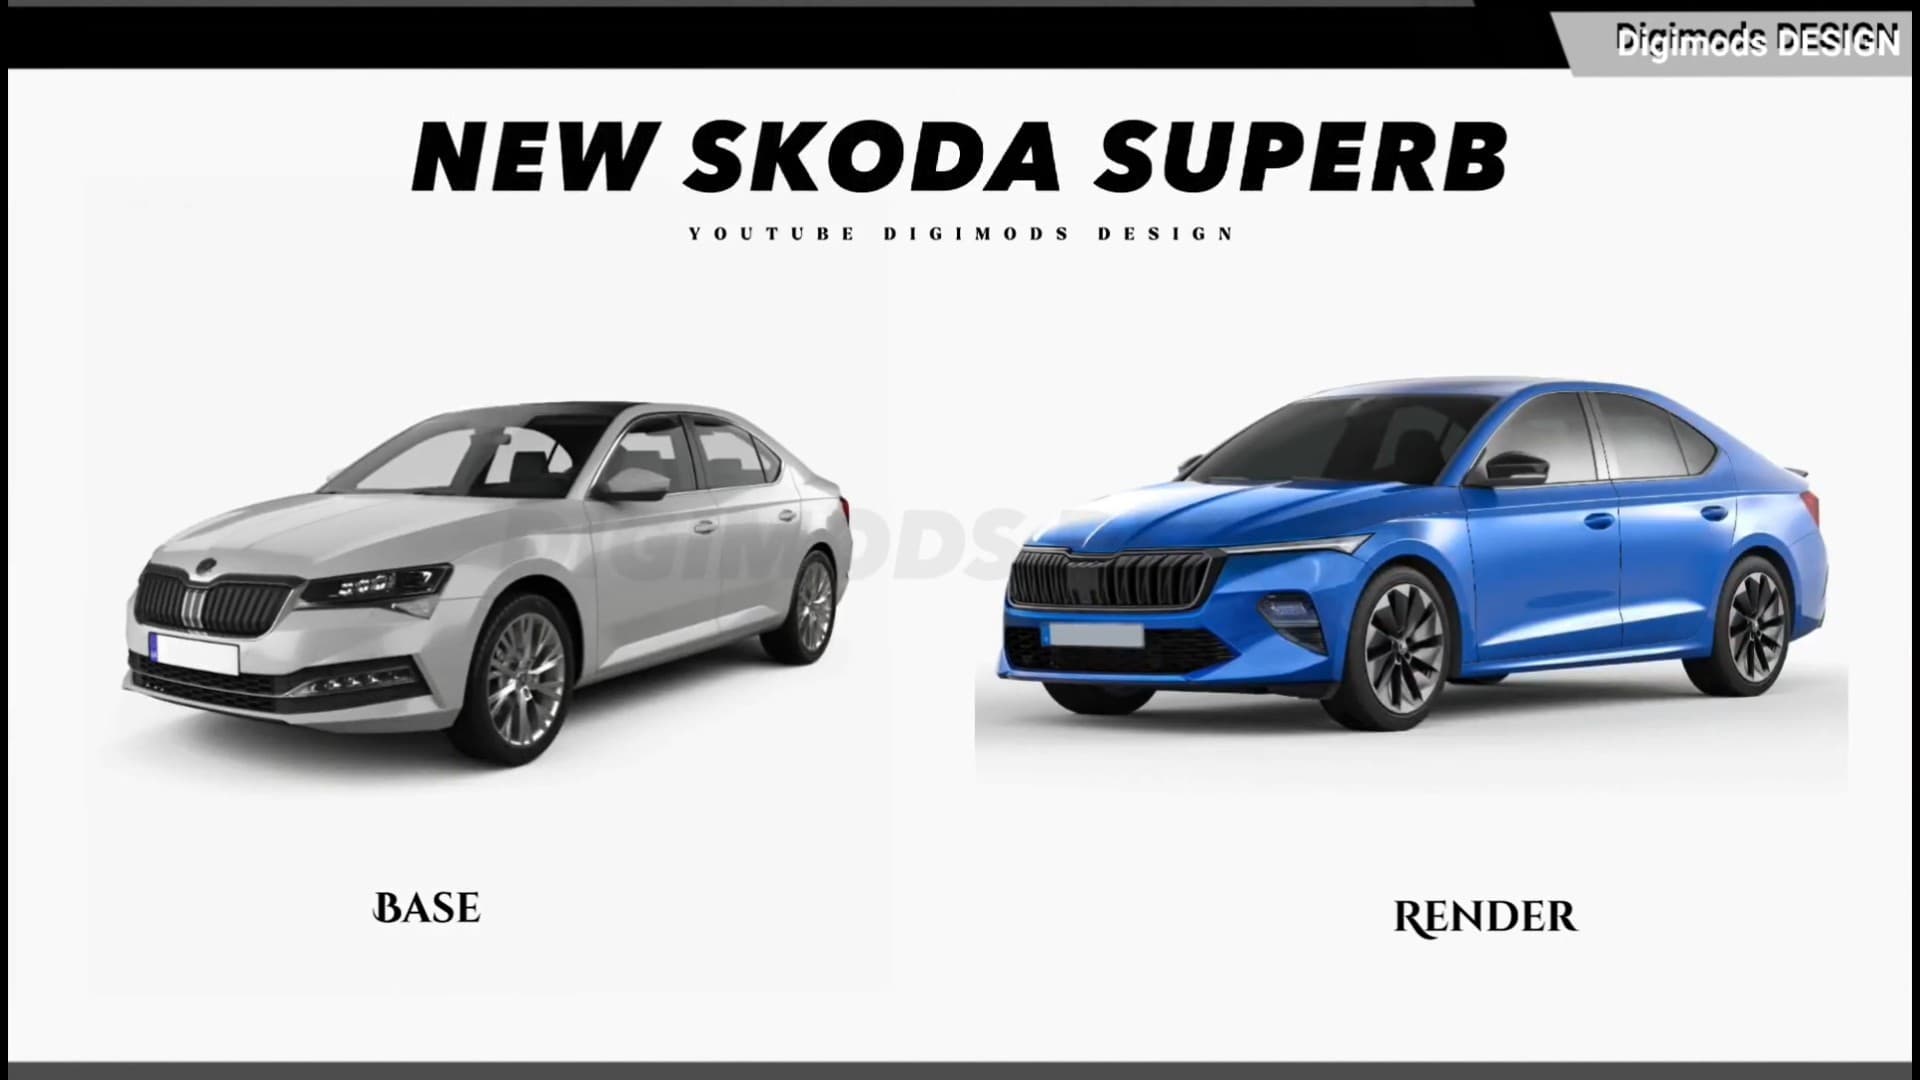 all new fourth gen skoda3 superb reveals its roomy silhouette way ahead of due time 1 1